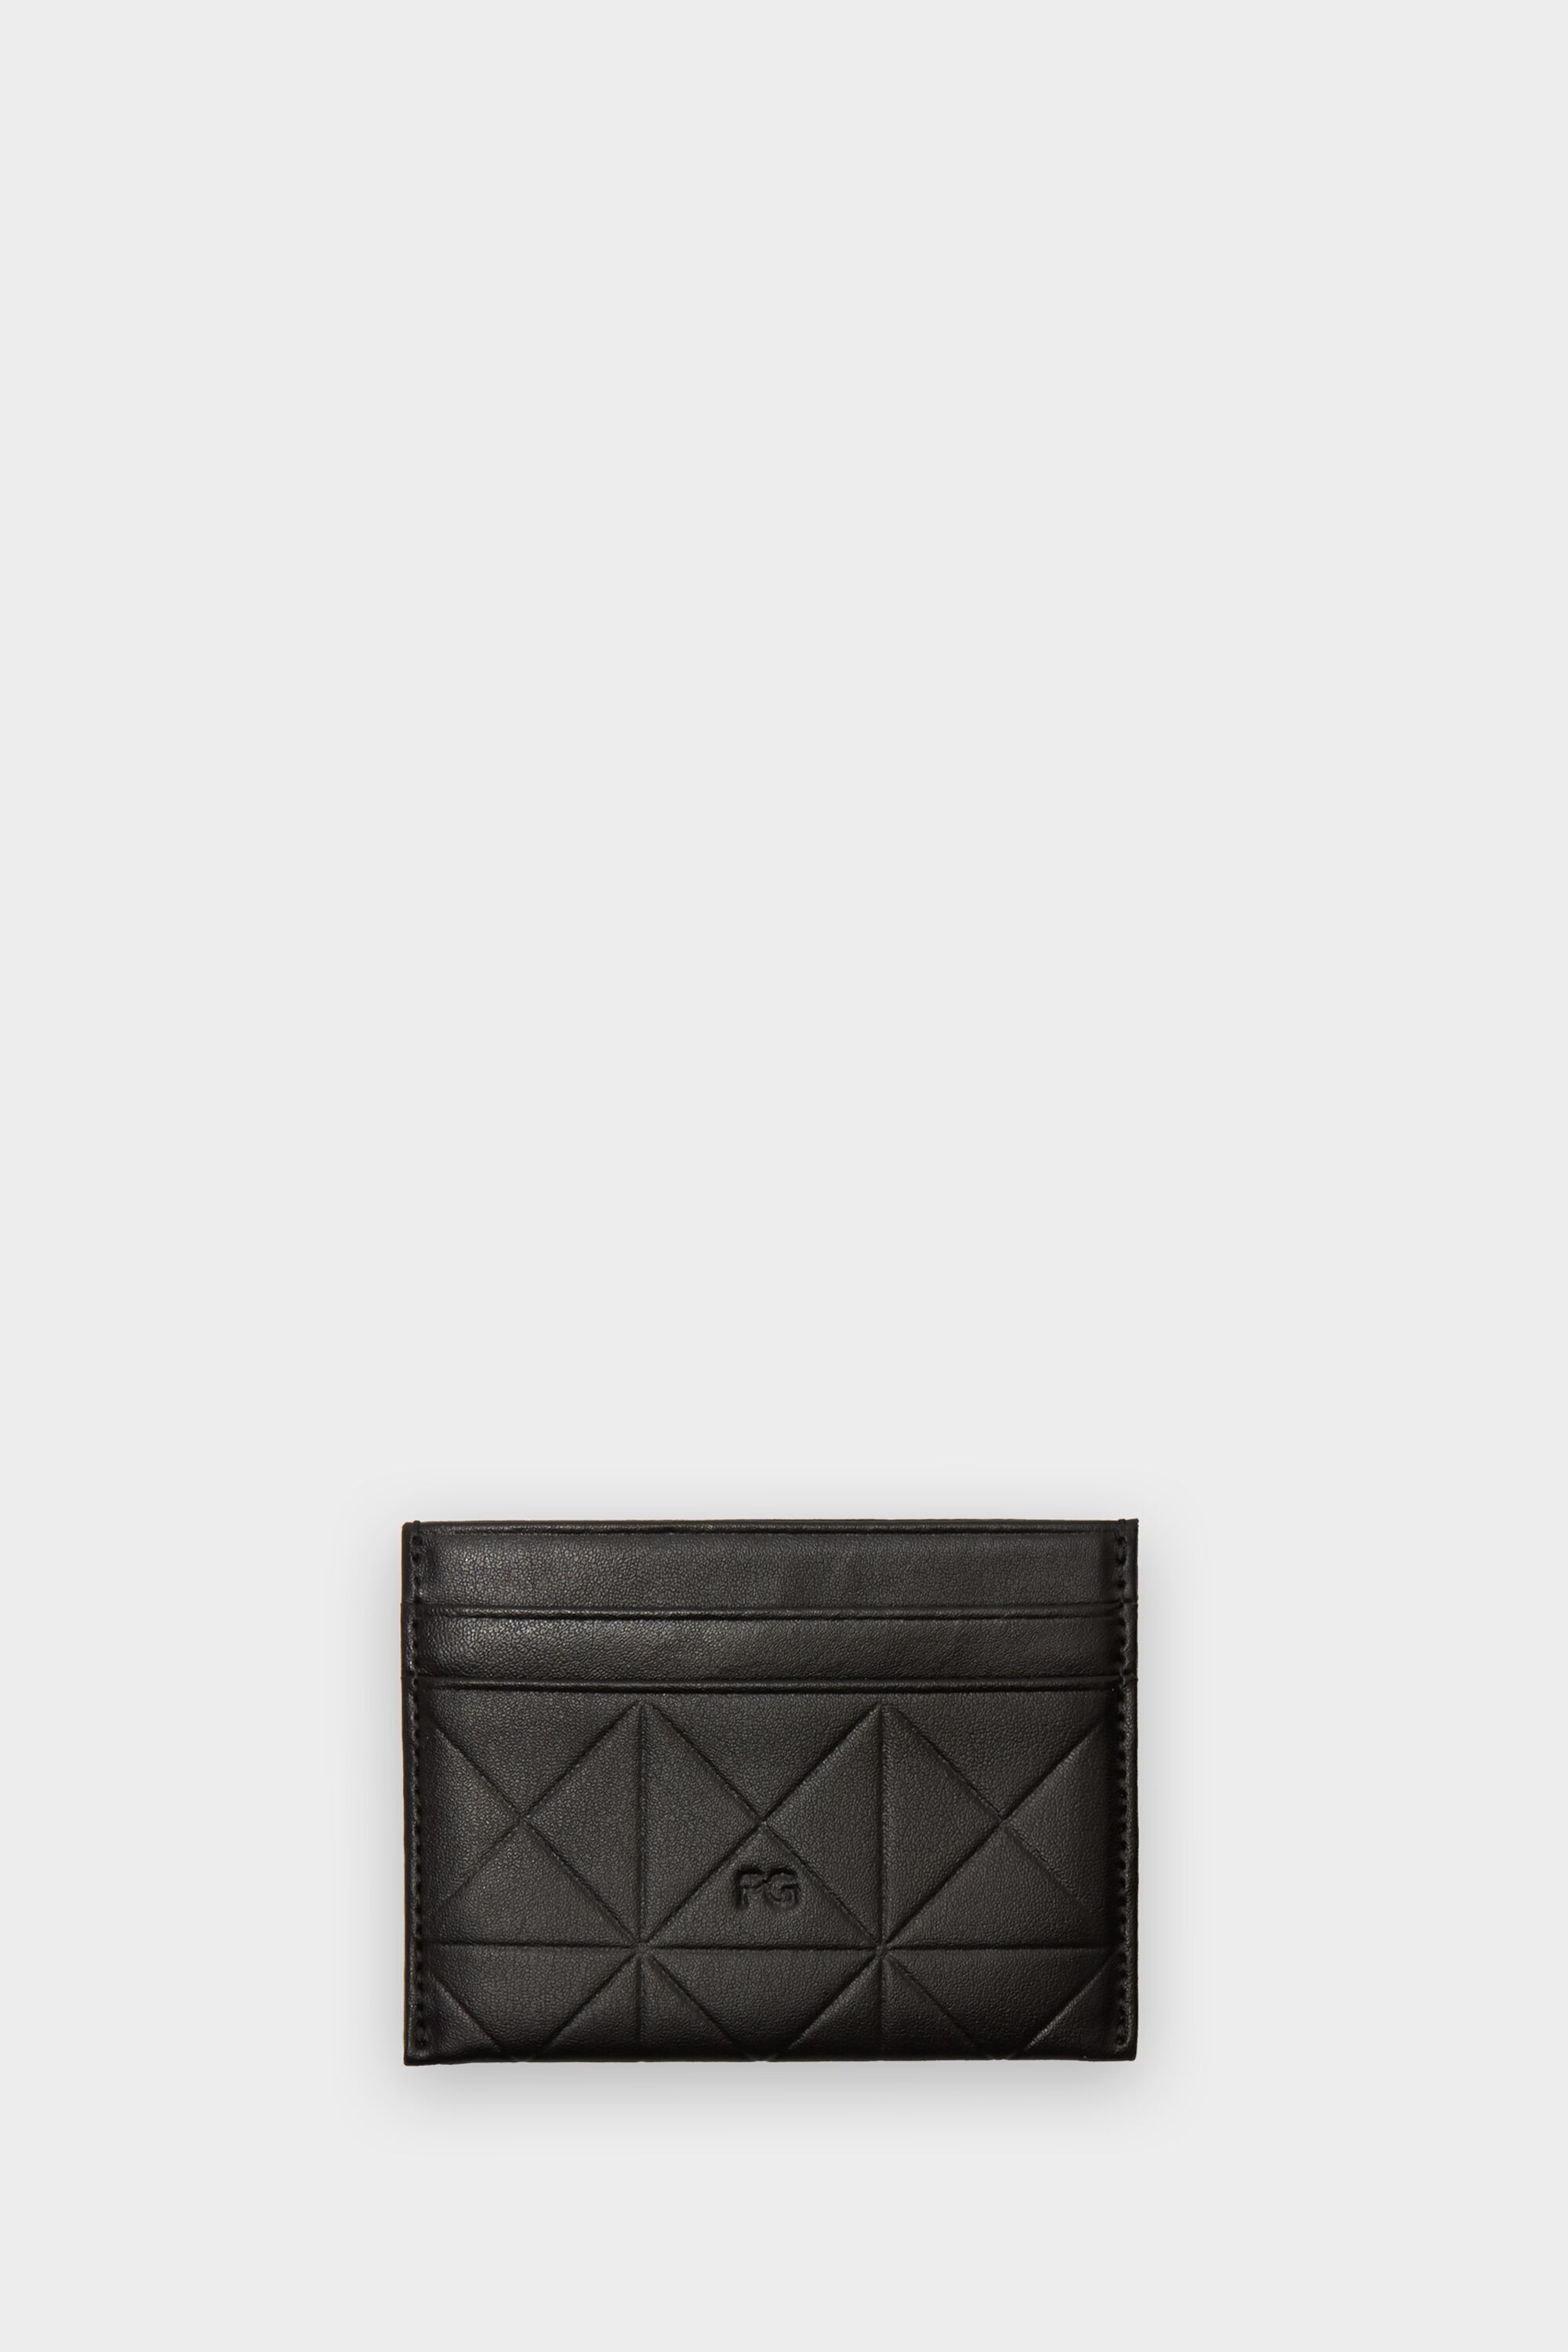 PG cube leather card holder